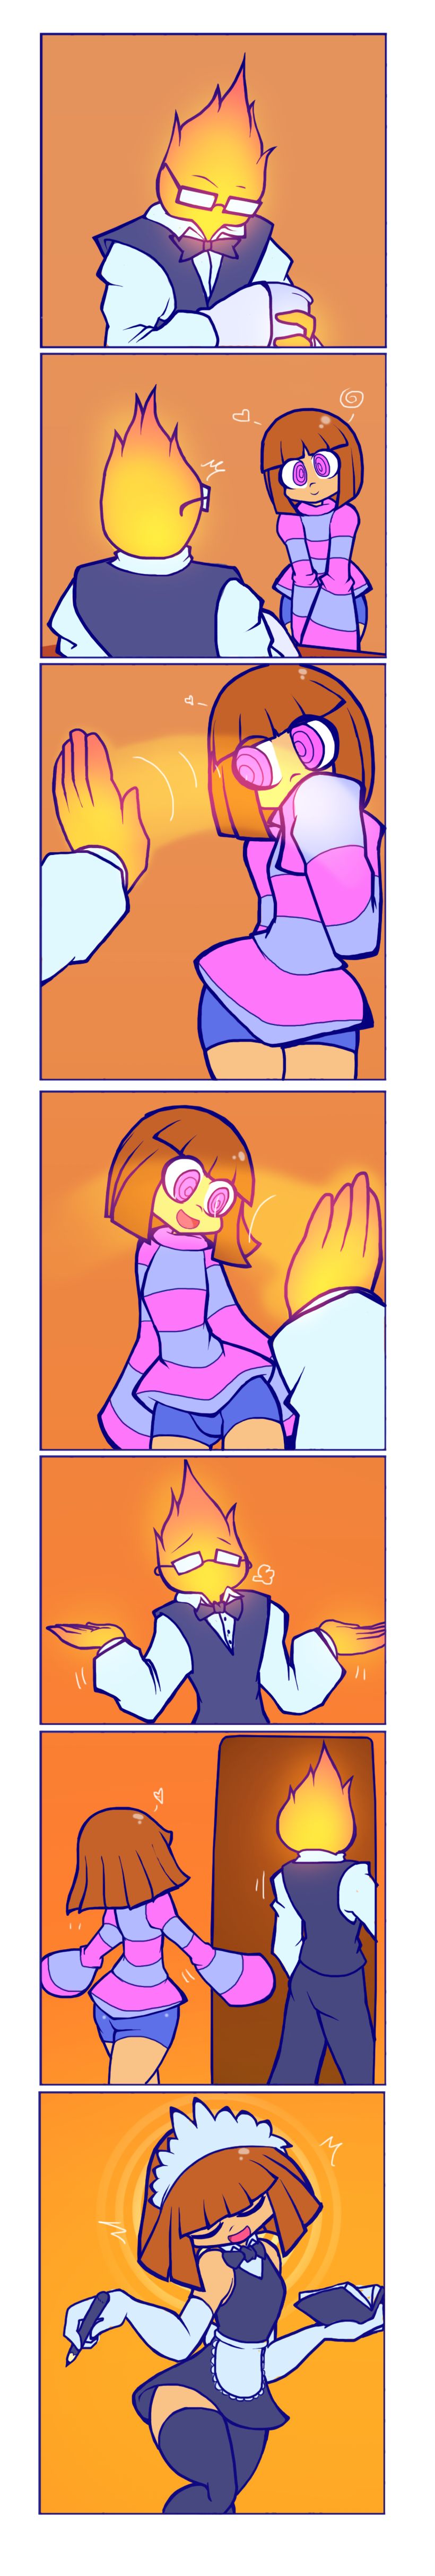 Frisk's Hypnotic Adventures page 6 full.